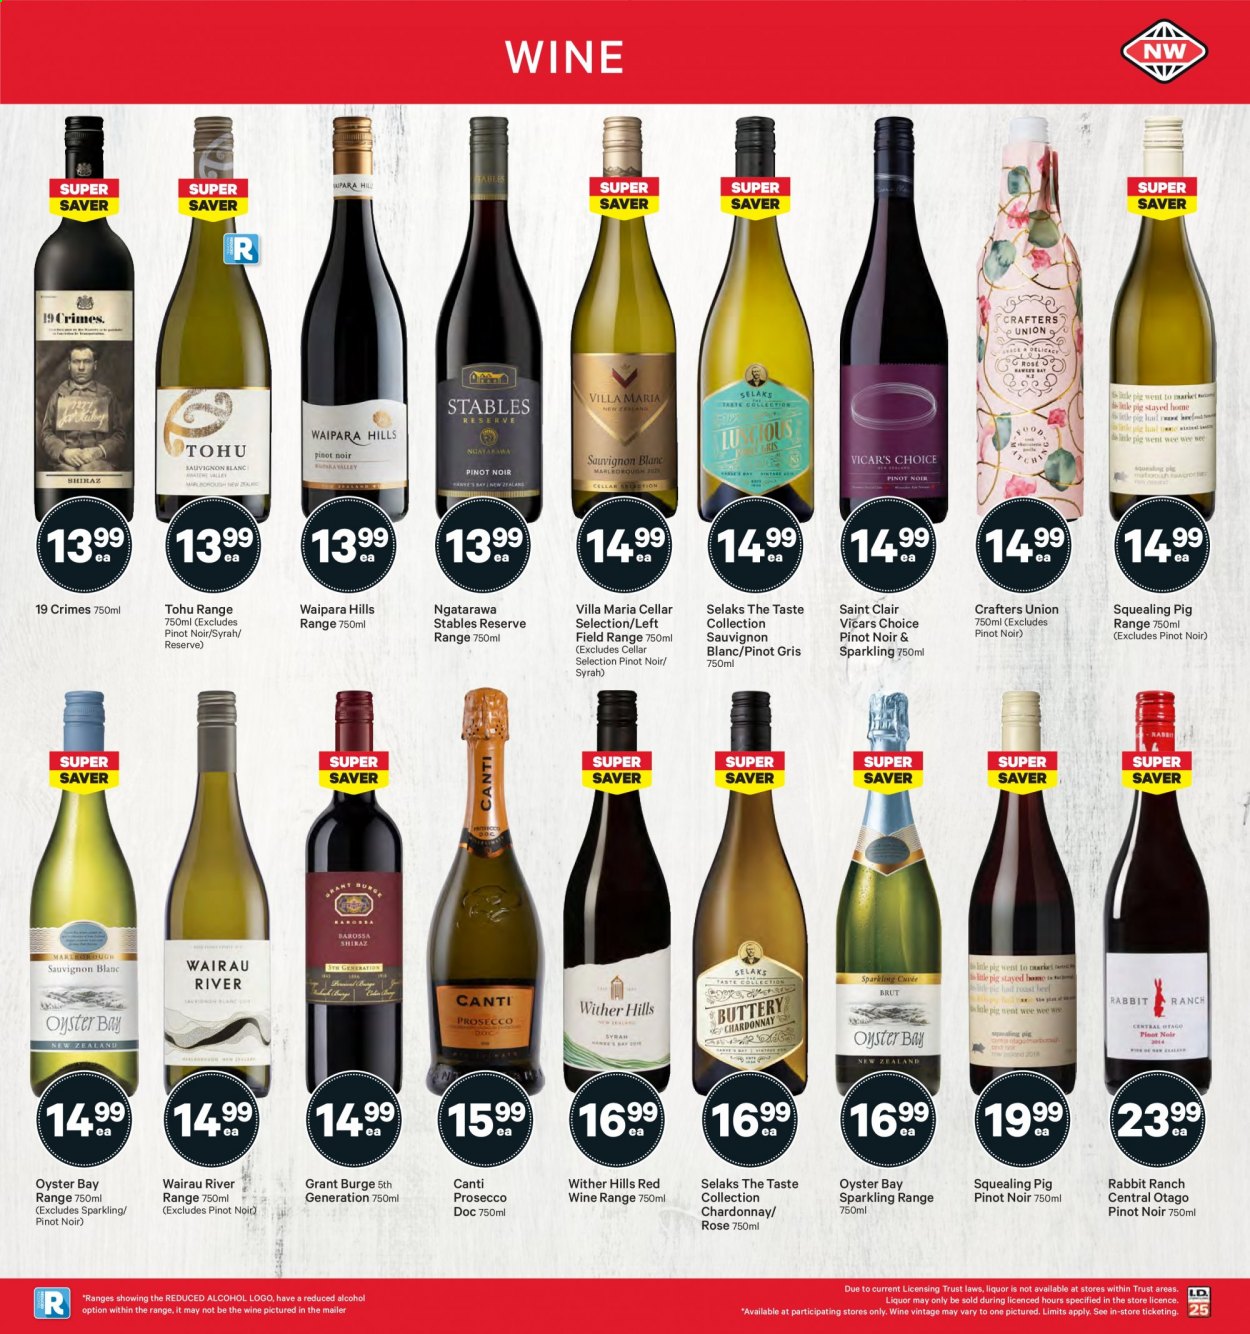 thumbnail - New World mailer - 26.07.2021 - 01.08.2021 - Sales products - oysters, rabbit, red wine, white wine, prosecco, Chardonnay, wine, Pinot Noir, alcohol, Rabbit Ranch, Wither Hills, Syrah, Pinot Grigio, Sauvignon Blanc, rosé wine. Page 33.